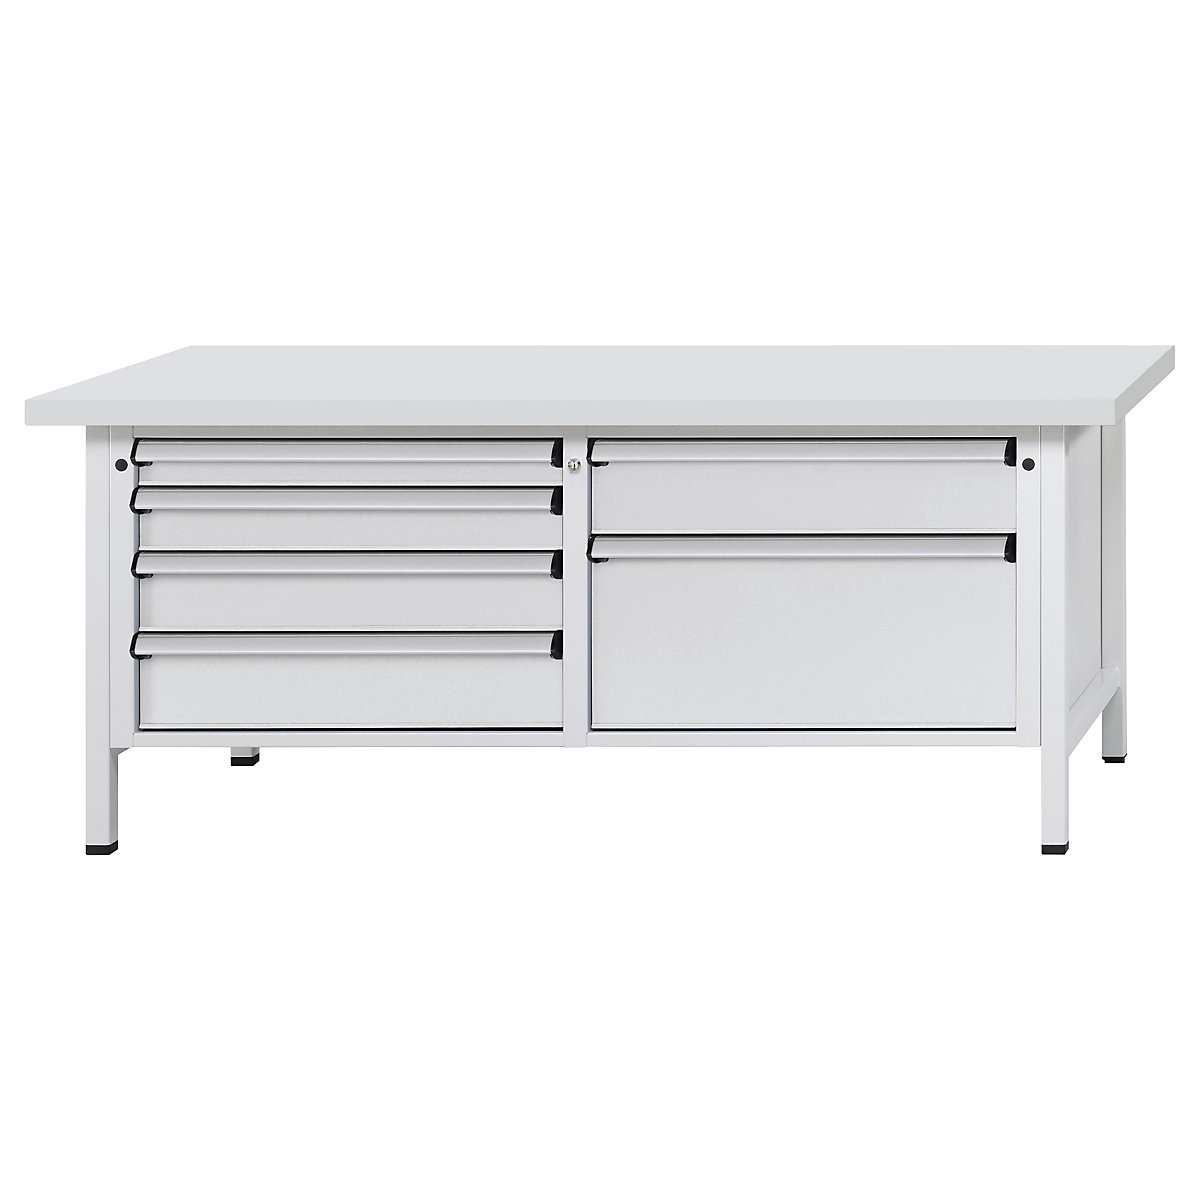 Workbench with XL/XXL drawers, frame construction – ANKE, width 2000 mm, 6 drawers, universal worktop, front in light grey-9